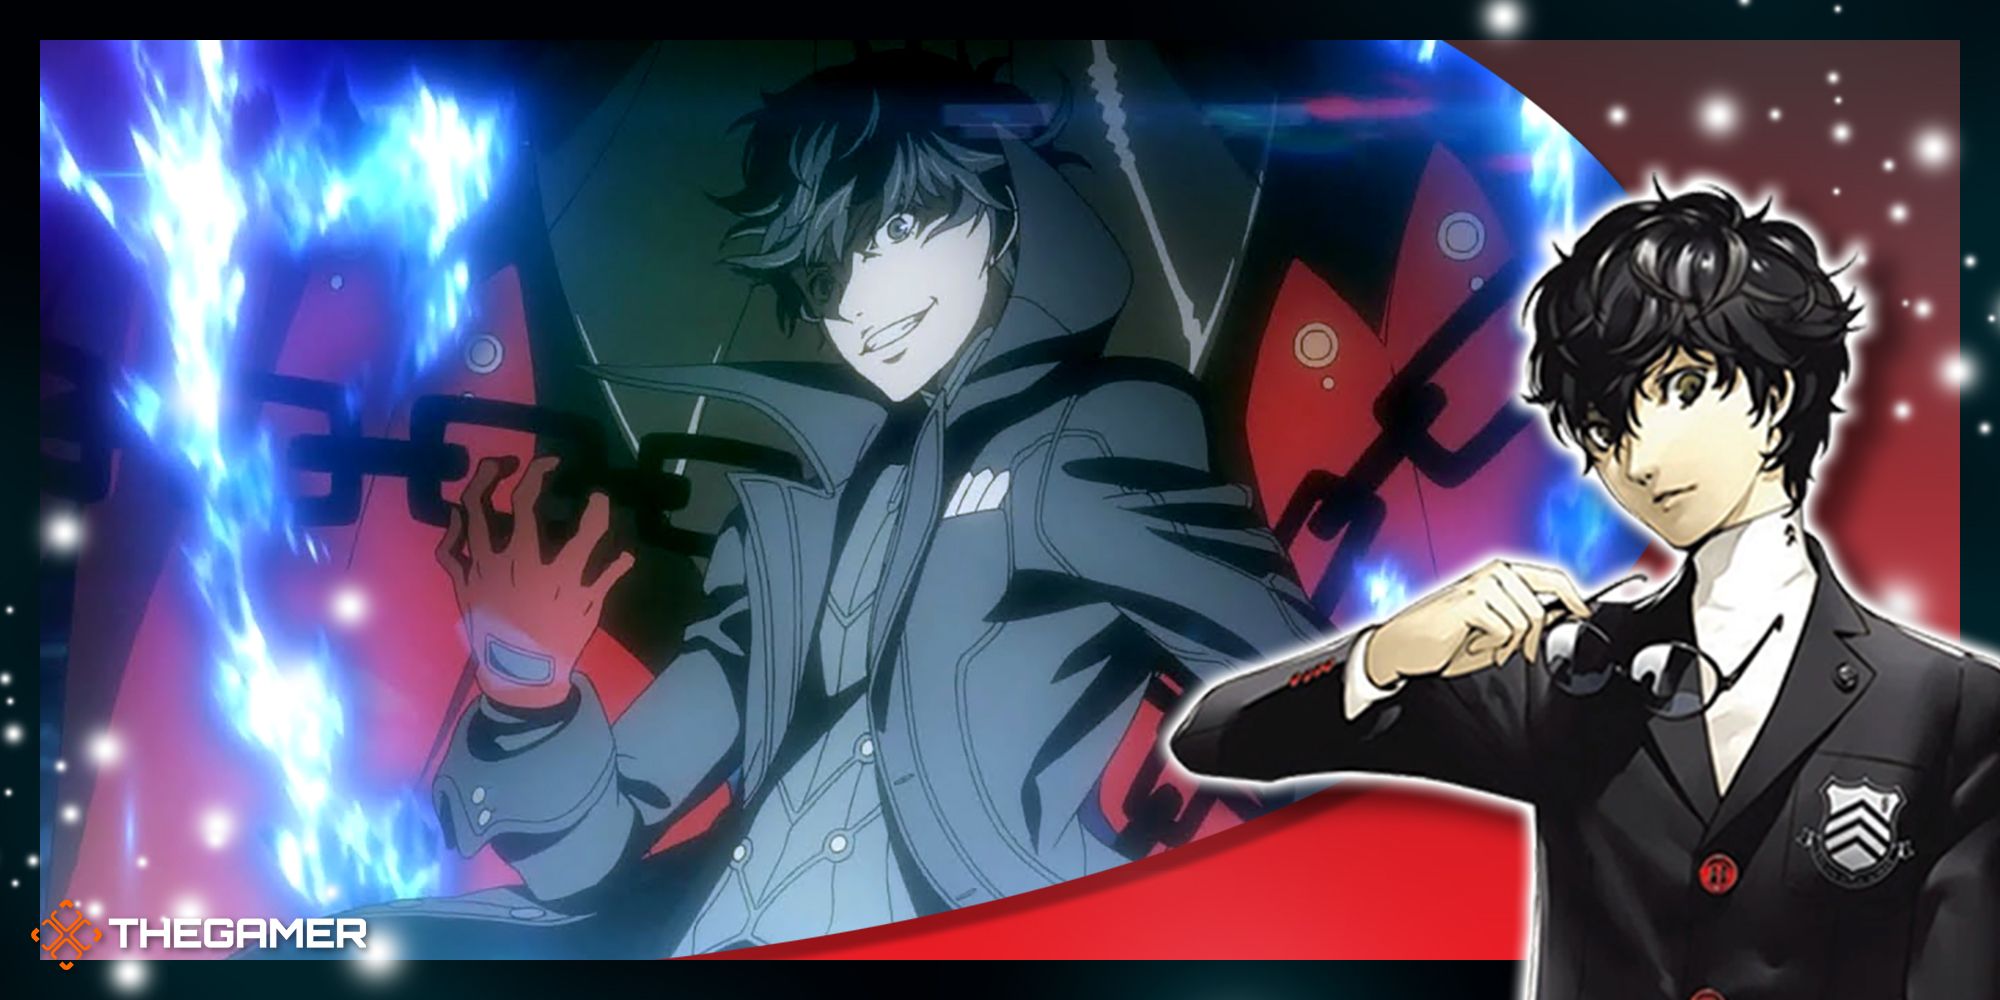 ren amamiya in his student uniform with him in his joker costume awakening to arsene in the background from persona 5 royal